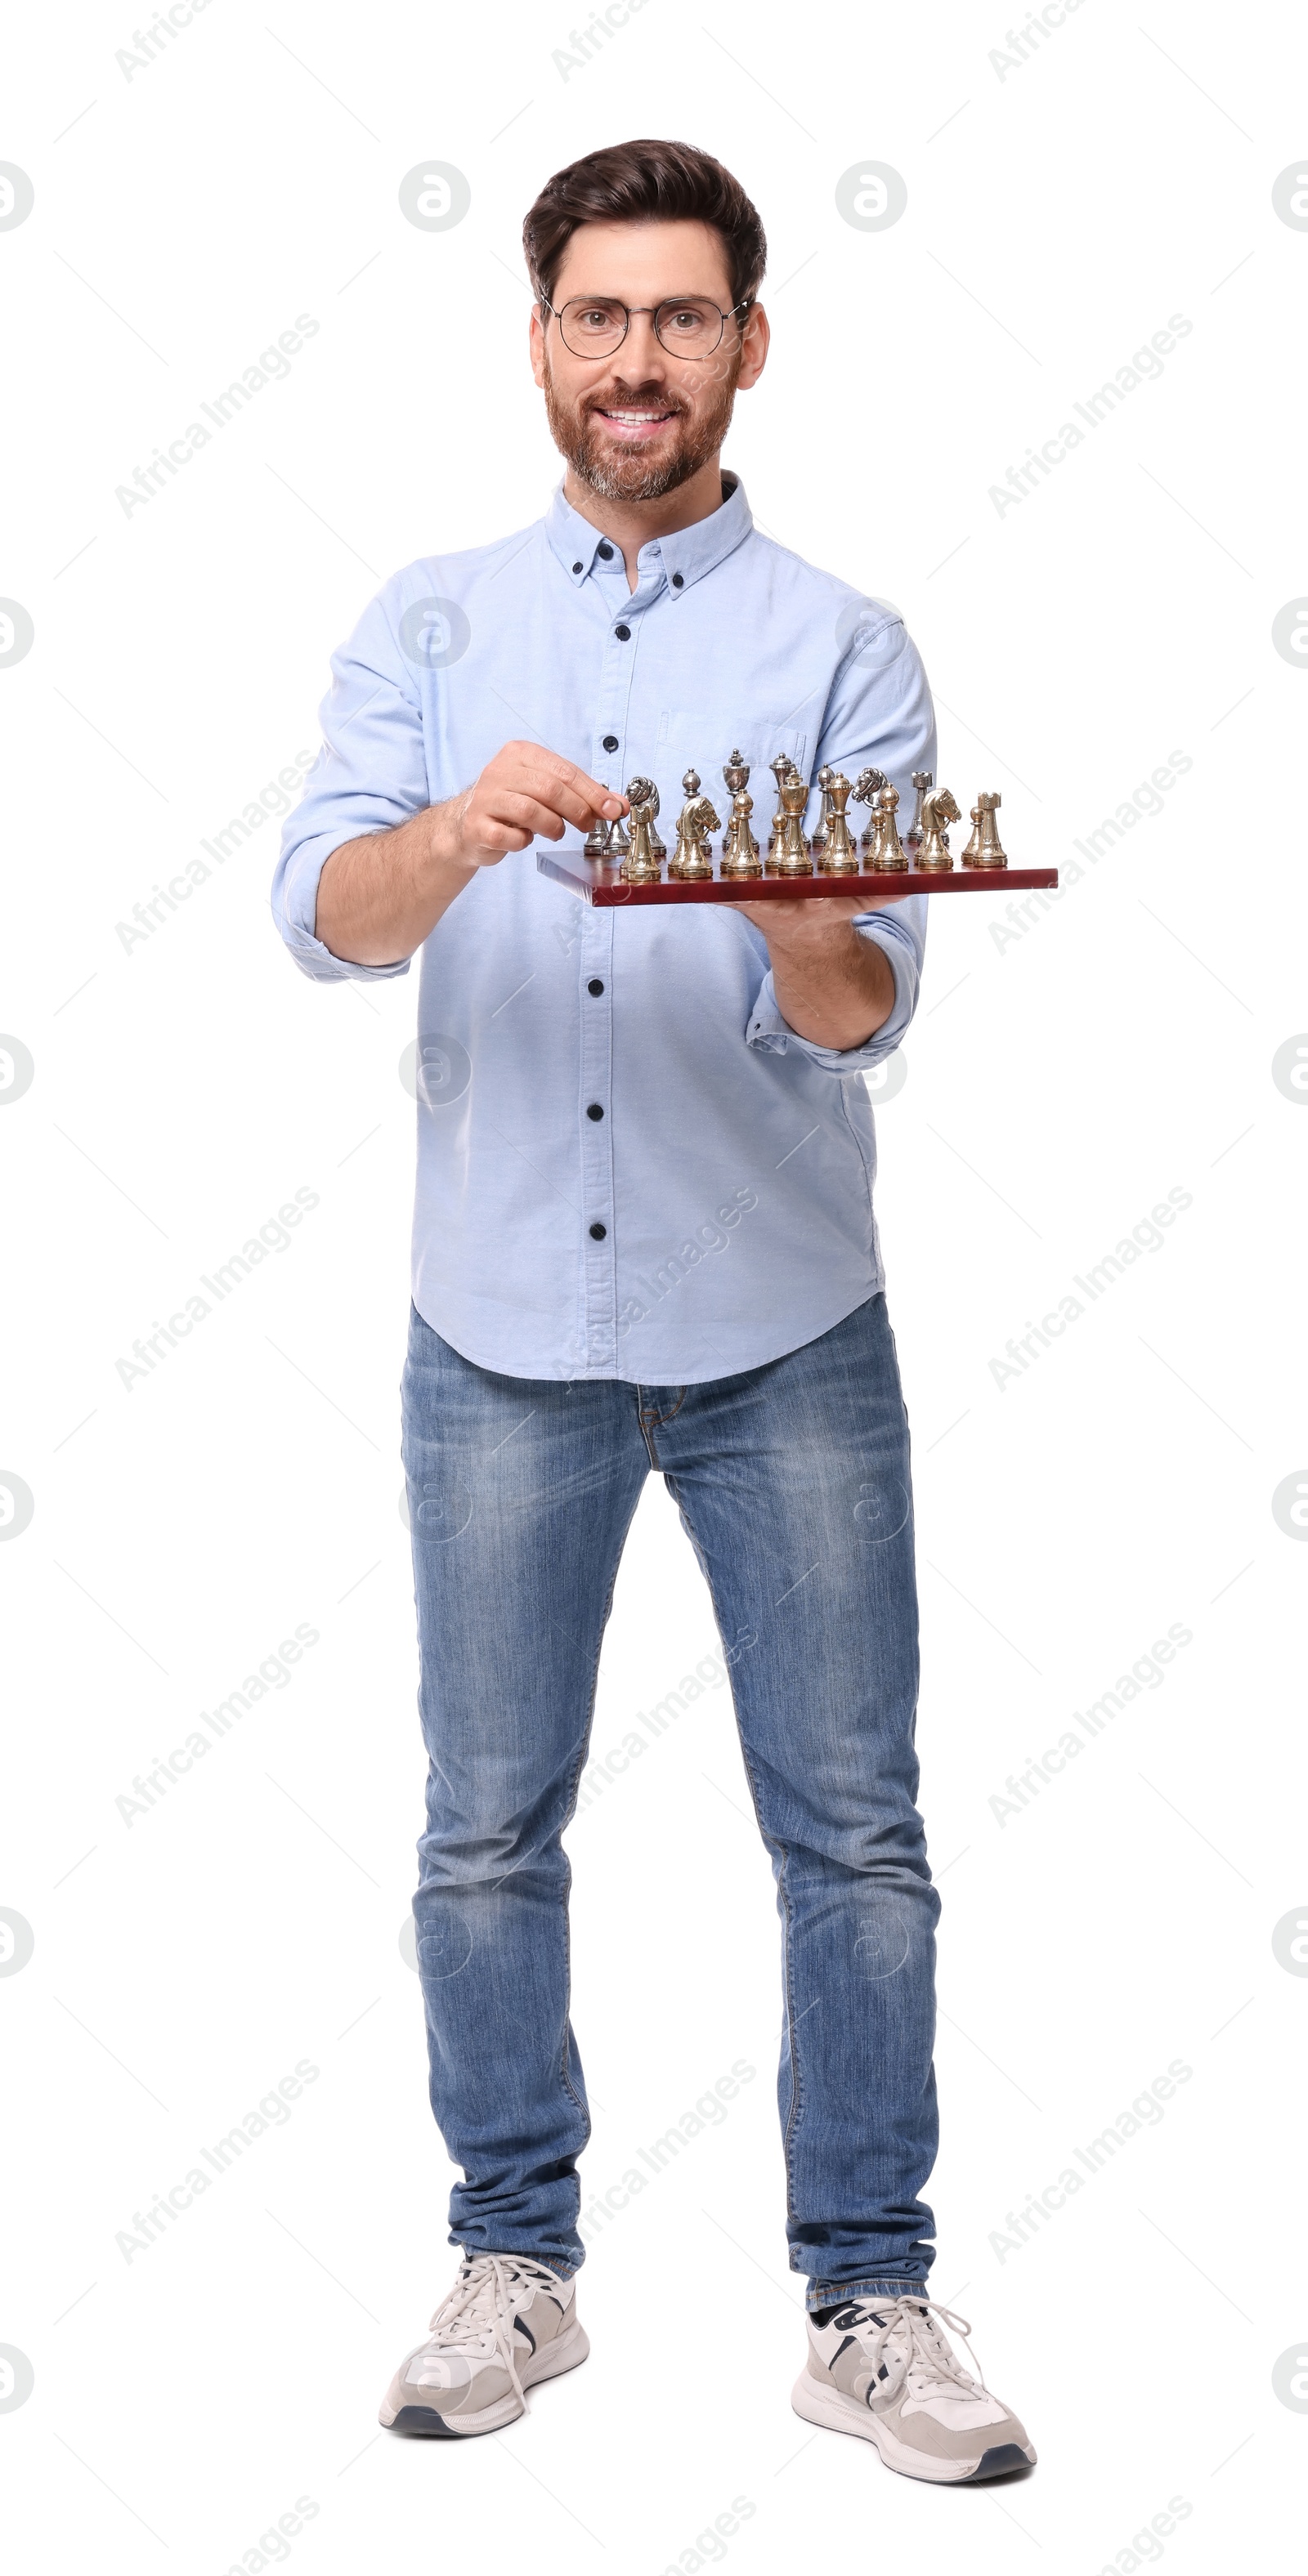 Photo of Smiling man holding chessboard with game pieces on white background